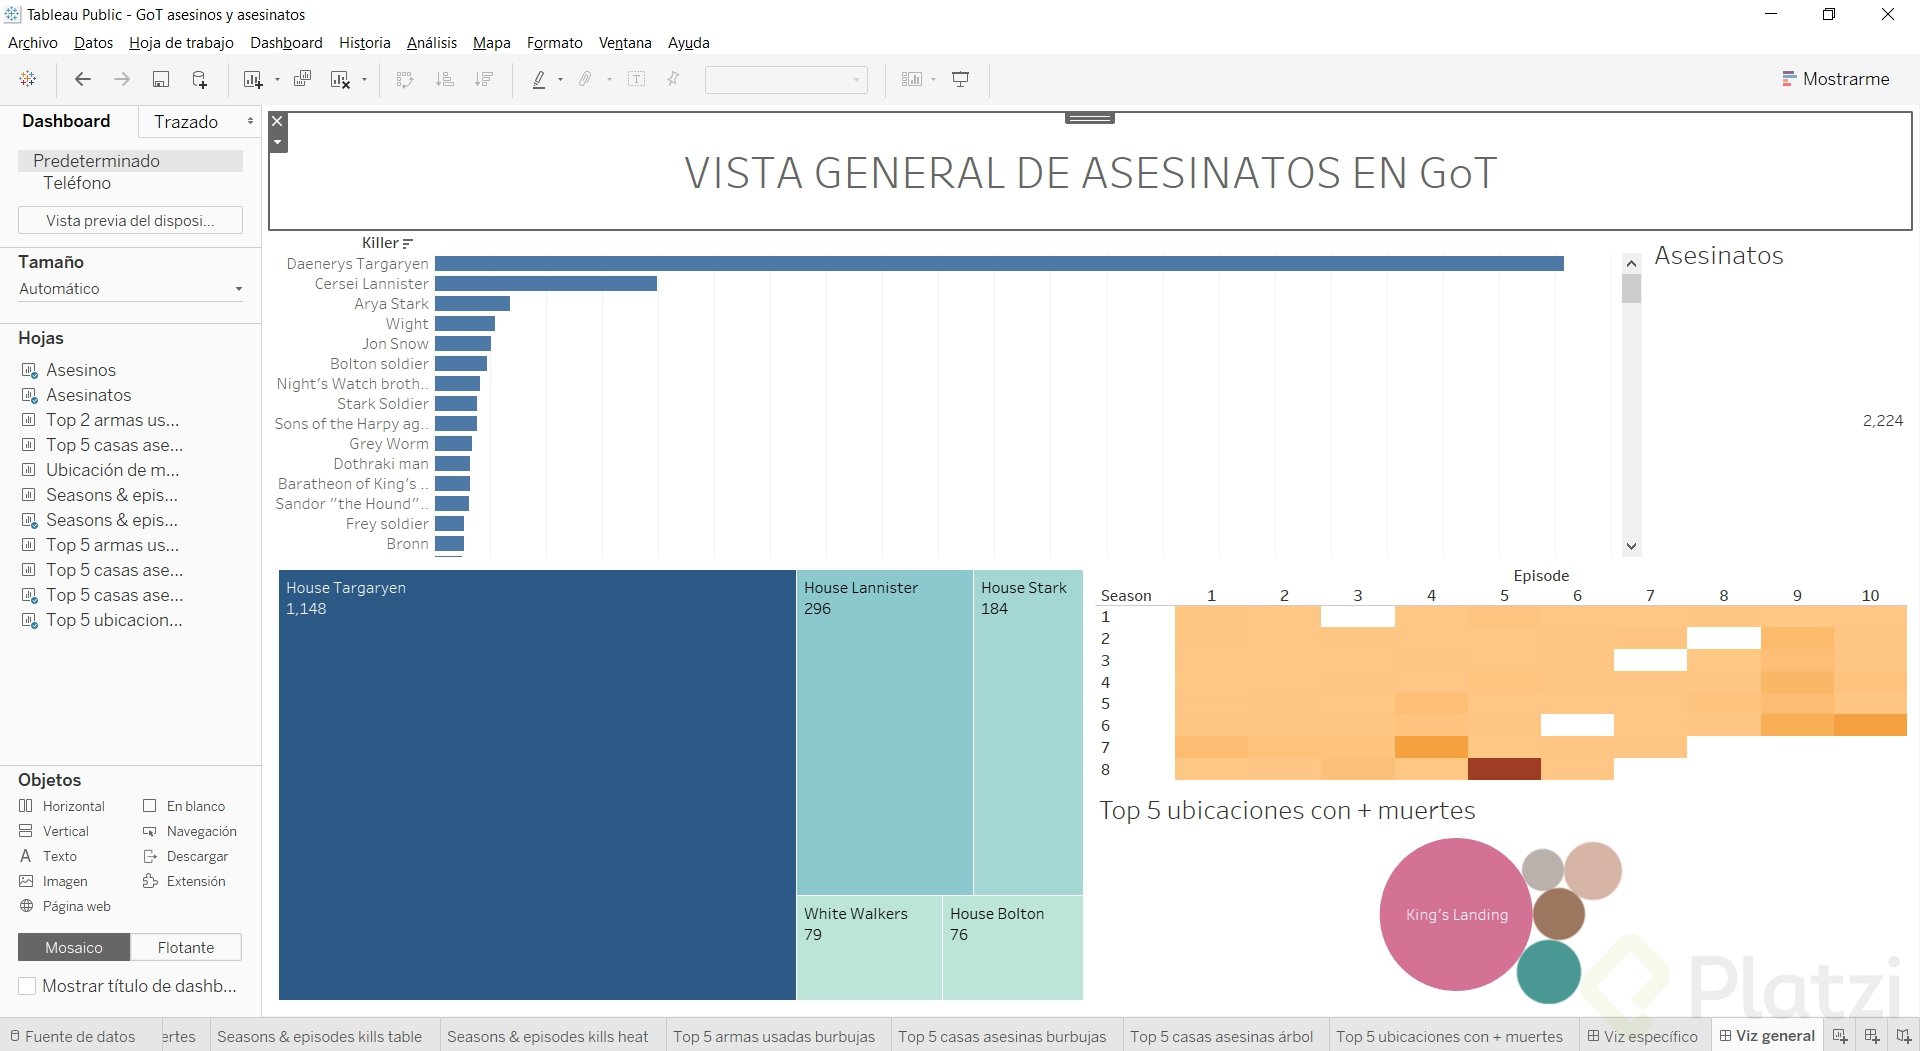 Tableau Public - GoT asesinos y asesinatos 13_03_2021 10_52_40 a. m..png